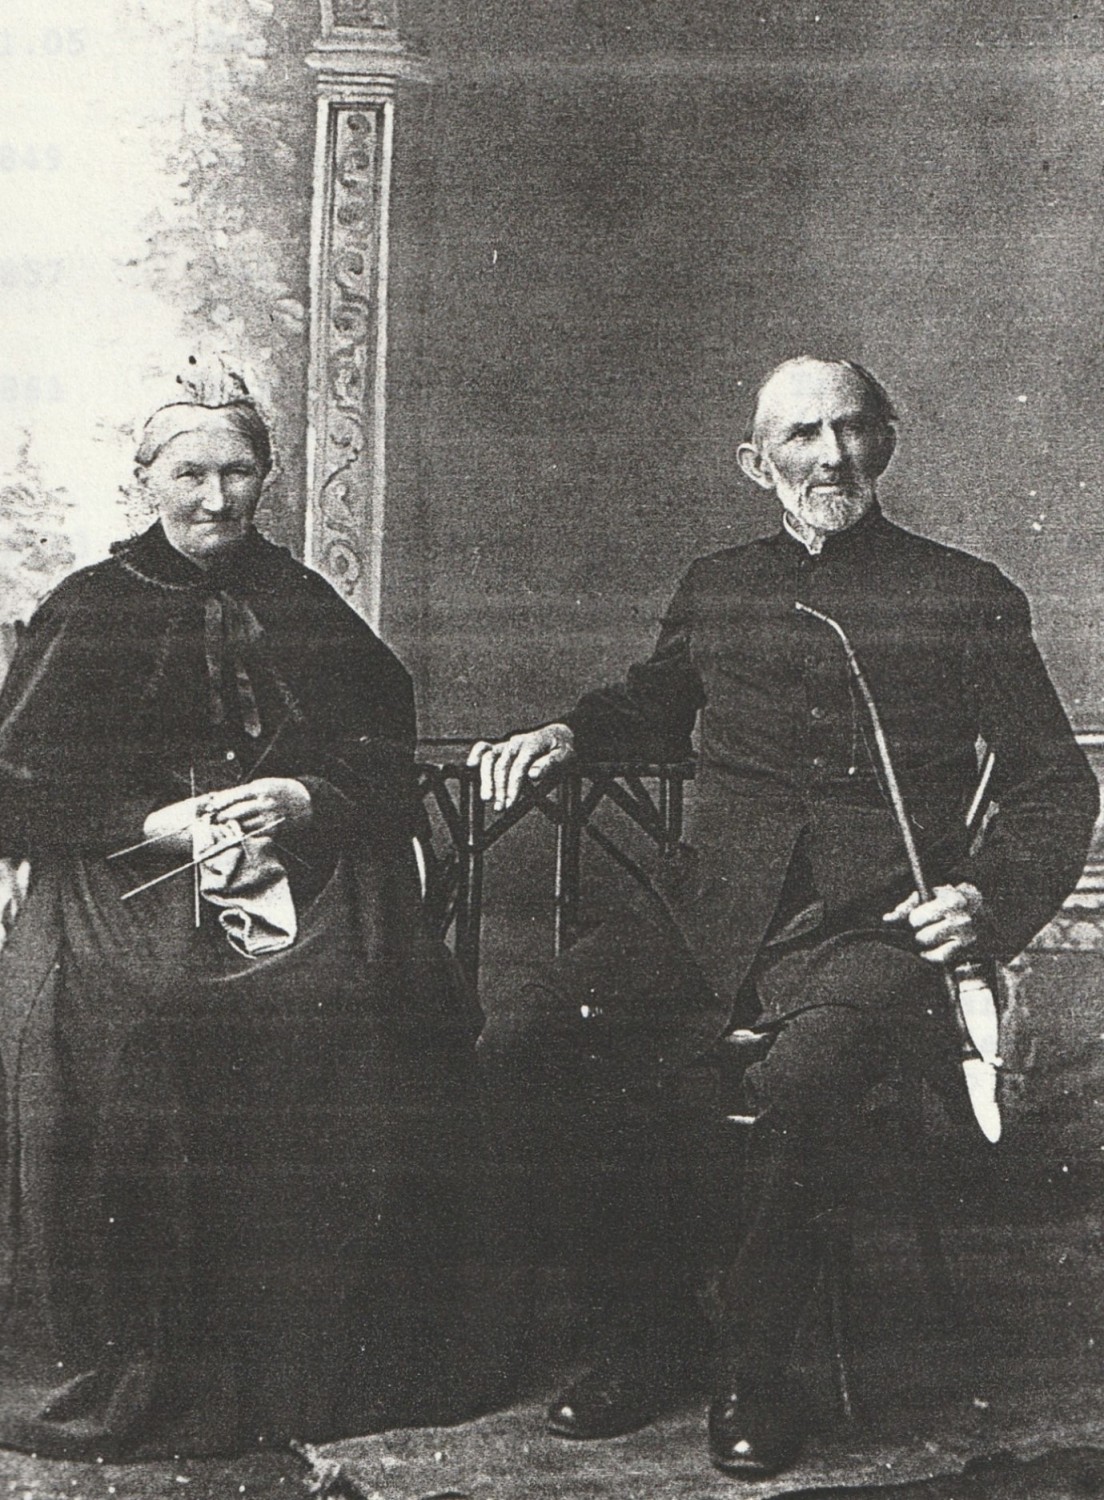 Auguste and Christoph Bartels